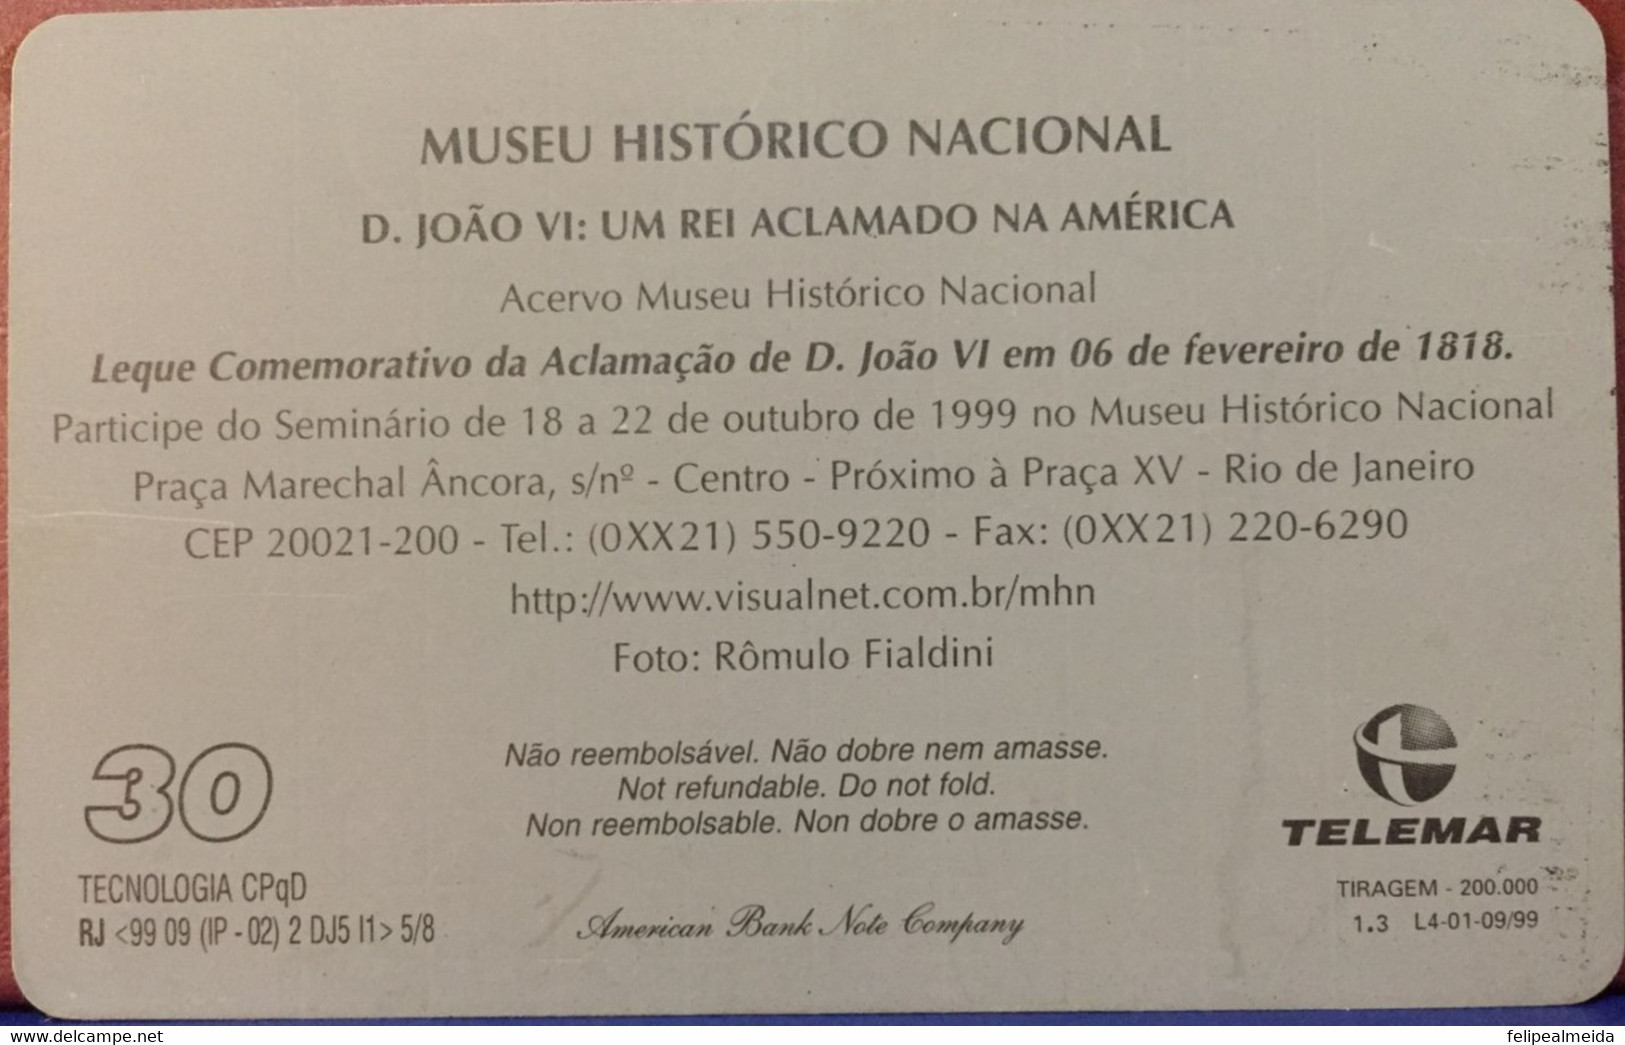 Phone Card Manufactured By Telebrasr In 1997 - Series Museu Historico Nacional - Photo Fan Commemorating The Acclamation - Culture